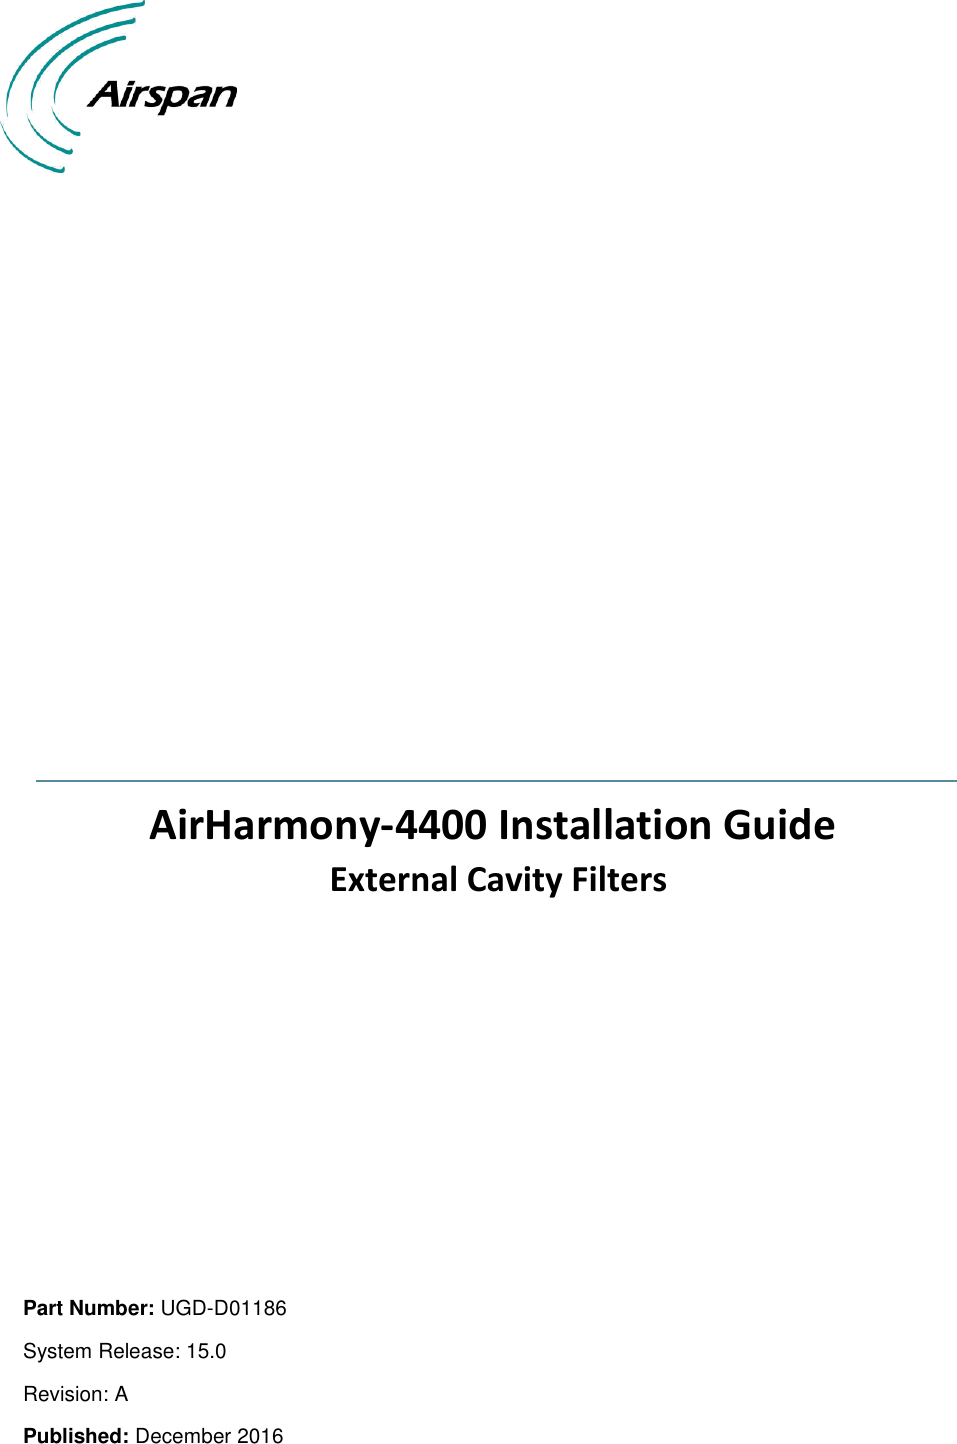                      AirHarmony-4400 Installation Guide  External Cavity Filters         Part Number: UGD-D01186 System Release: 15.0 Revision: A Published: December 2016 